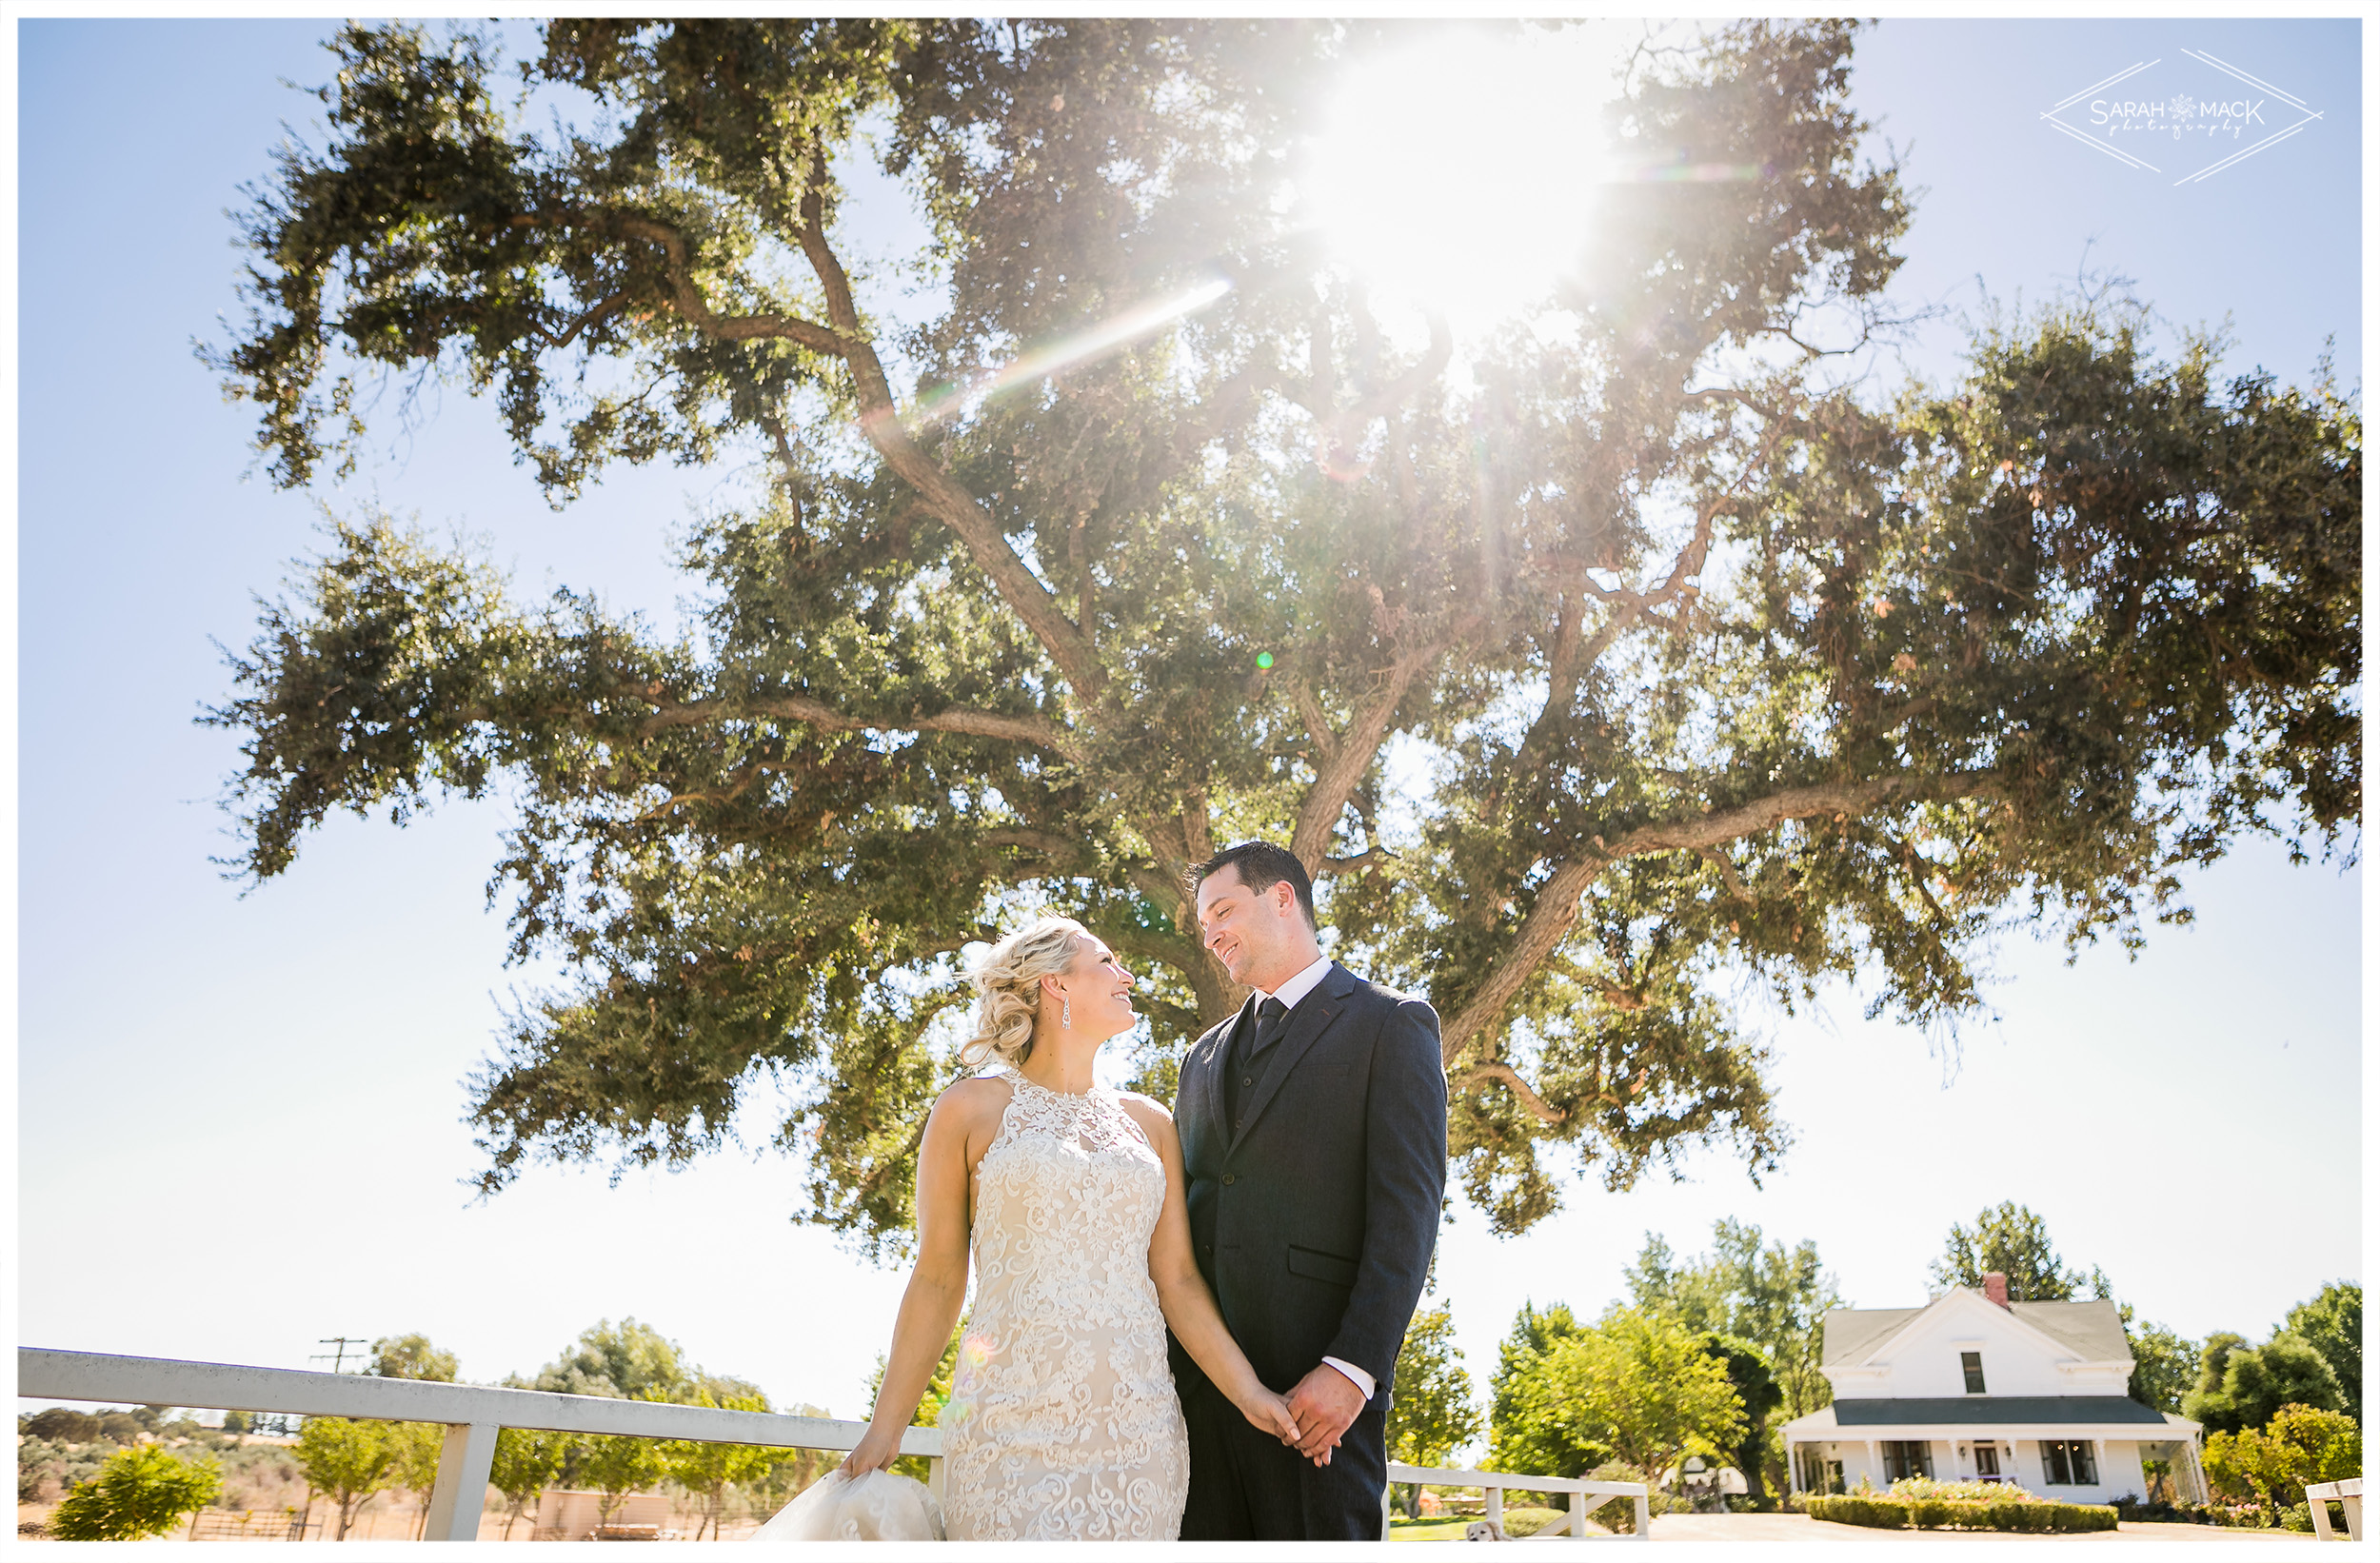 MA-Chandler-Ranch-Paso-Robles-Wedding-Photography-38.jpg